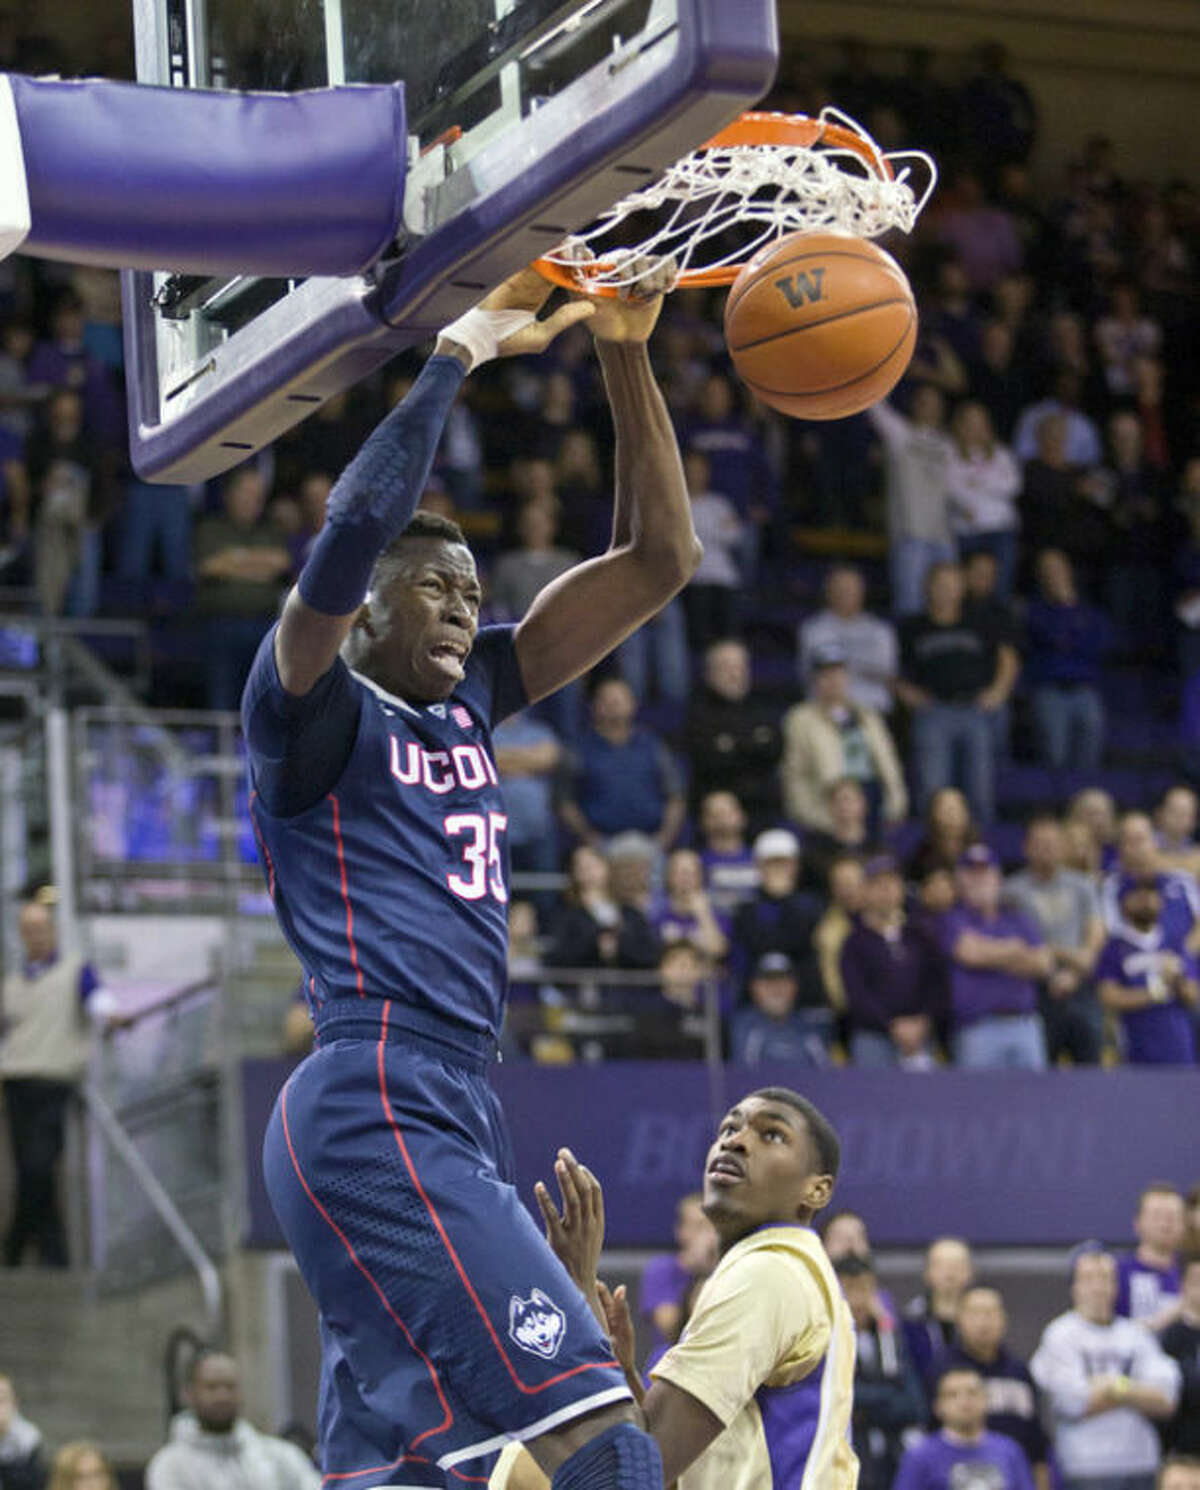 Connecticut's Amida Brimah dunks against Washington in the first half of an NCAA college basketball game in Seattle on Sunday, Dec. 22, 2013. (AP Photo/John Froschauer)